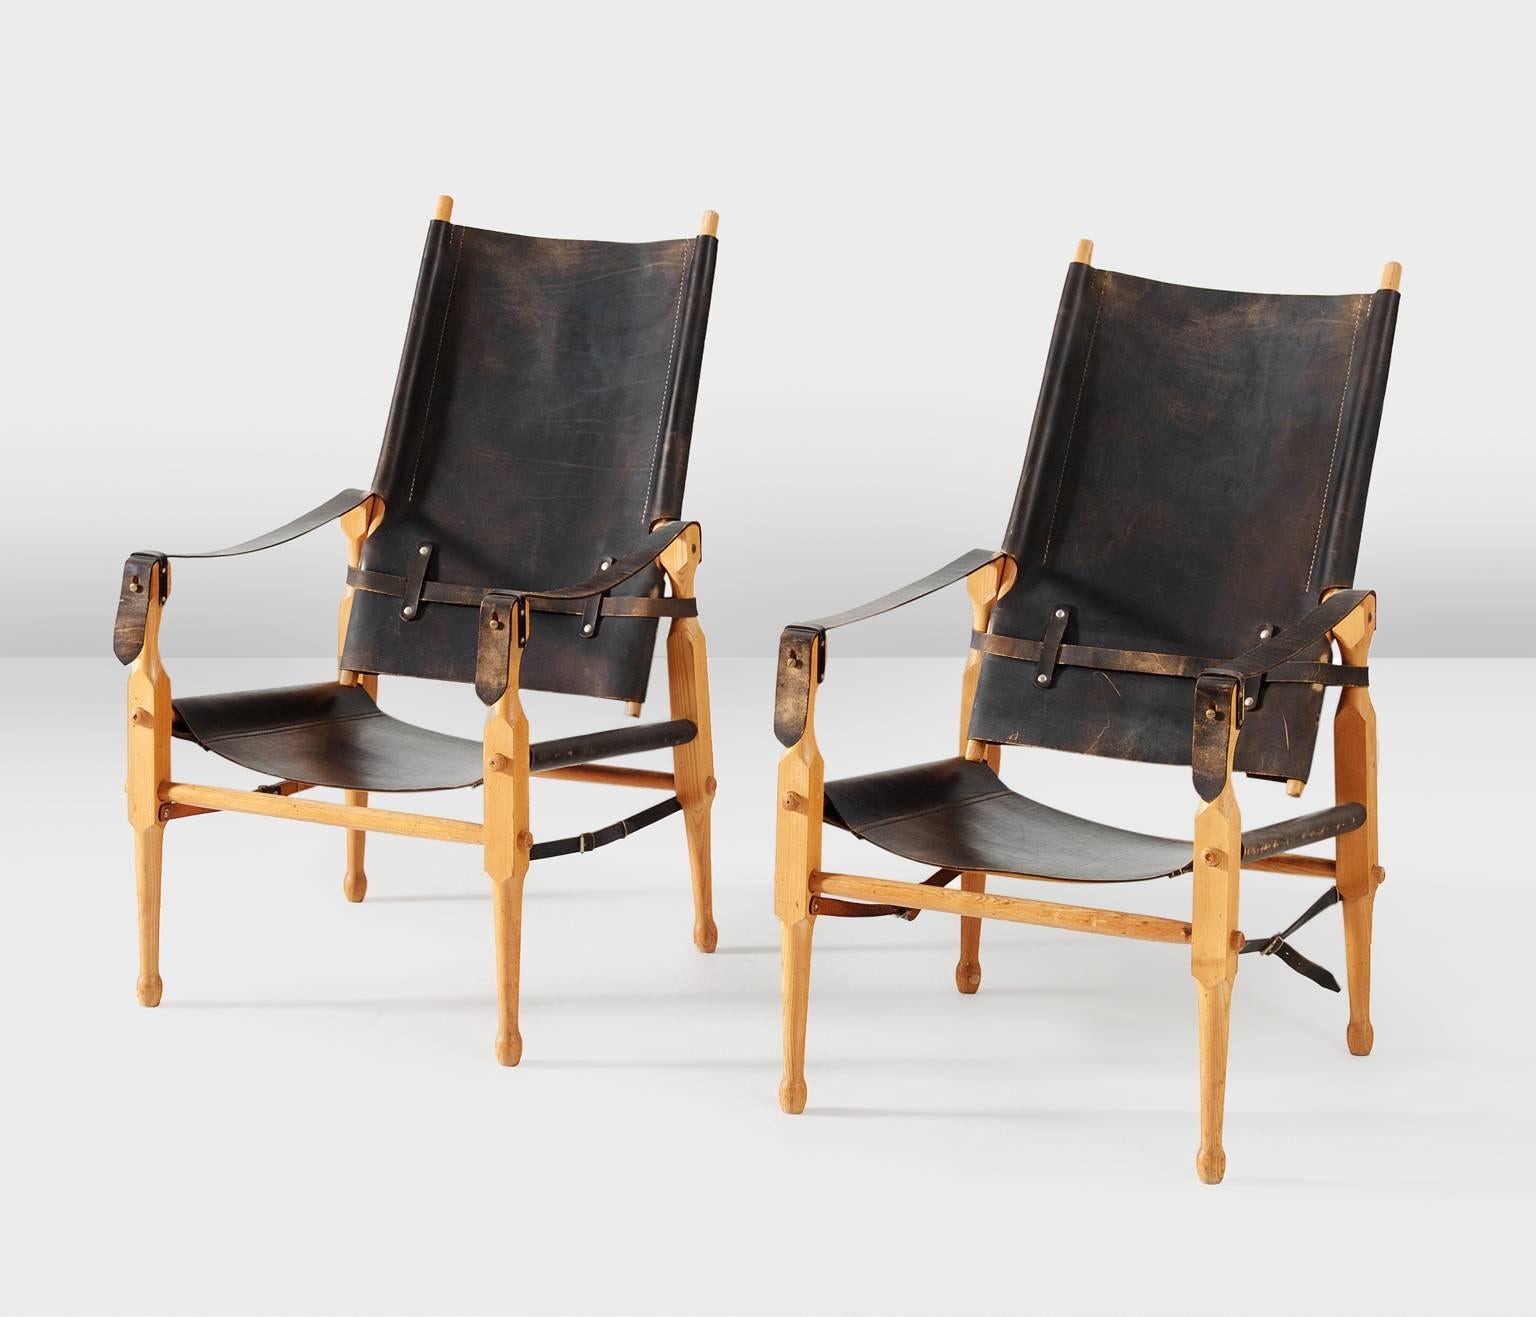 Wonderful pair of safari lounge chairs in original black saddle leather and solid beech wood, Denmark 1960s.

These comfortable armchairs are beautifully patinated. The smart constructions and typical upholstery really characterize this model.

The